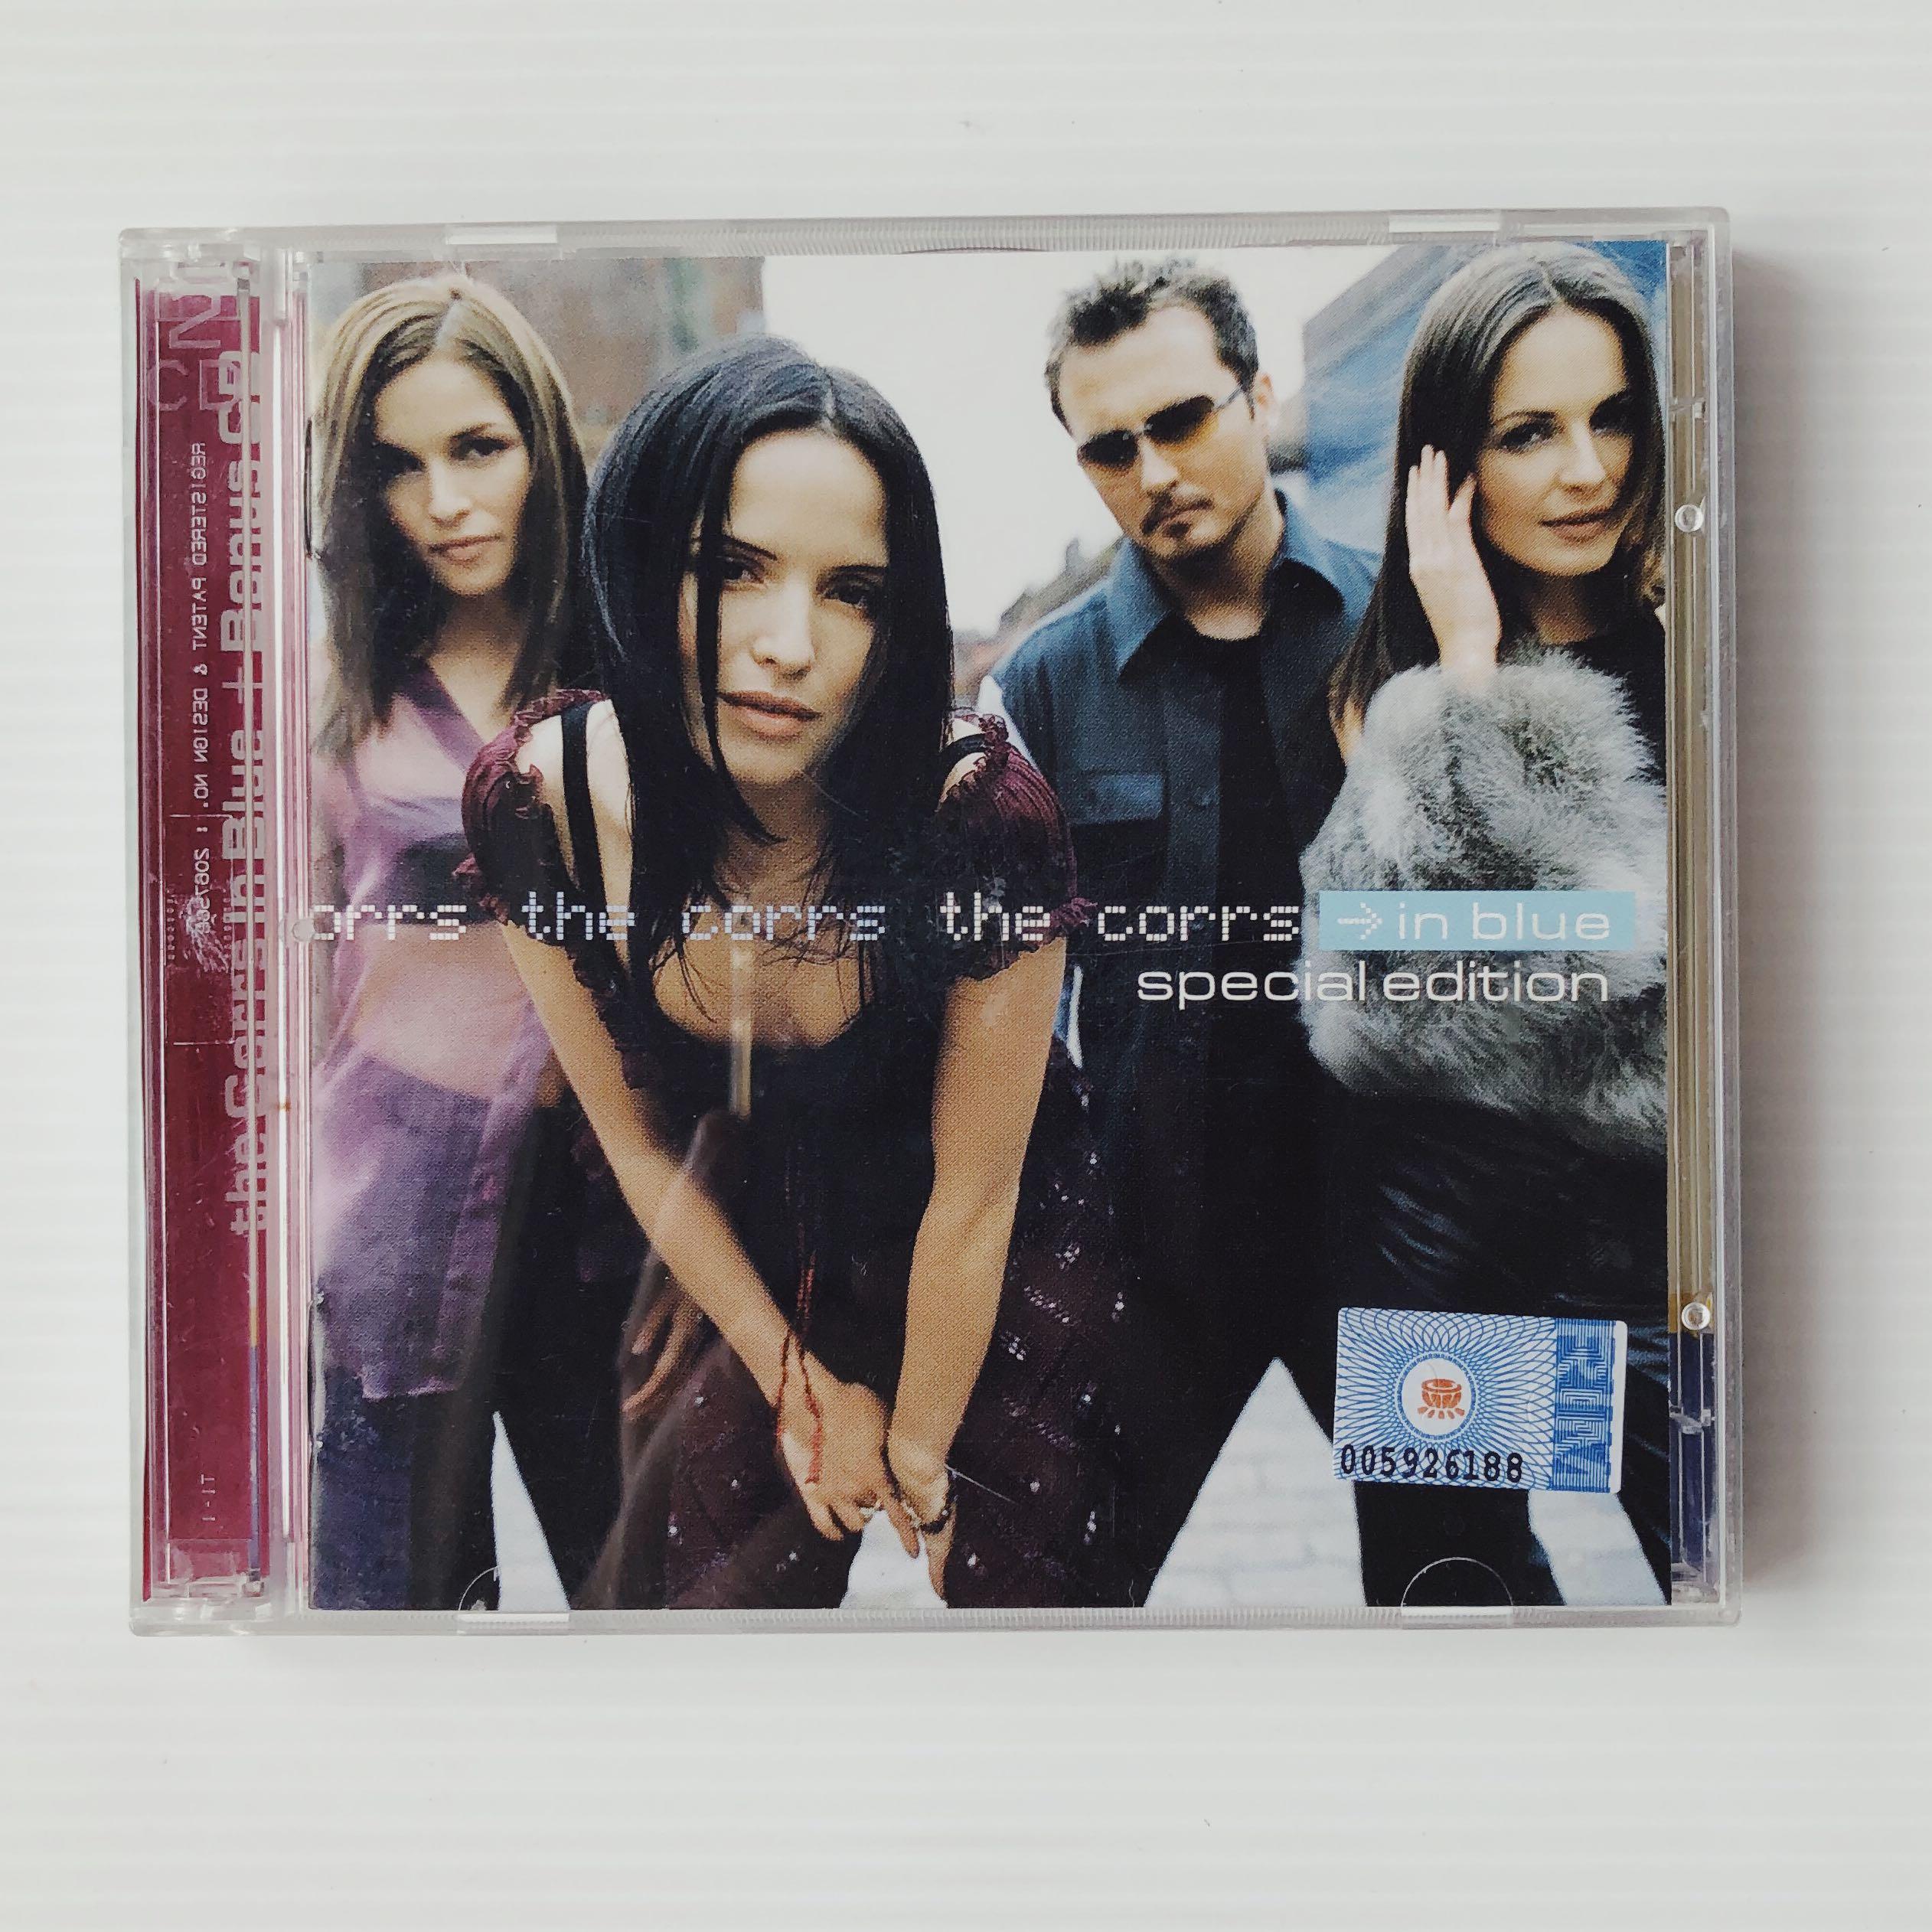 CD Album The Corrs in blue Special Edition, Hobbies  Toys, Music  Media,  CDs  DVDs on Carousell